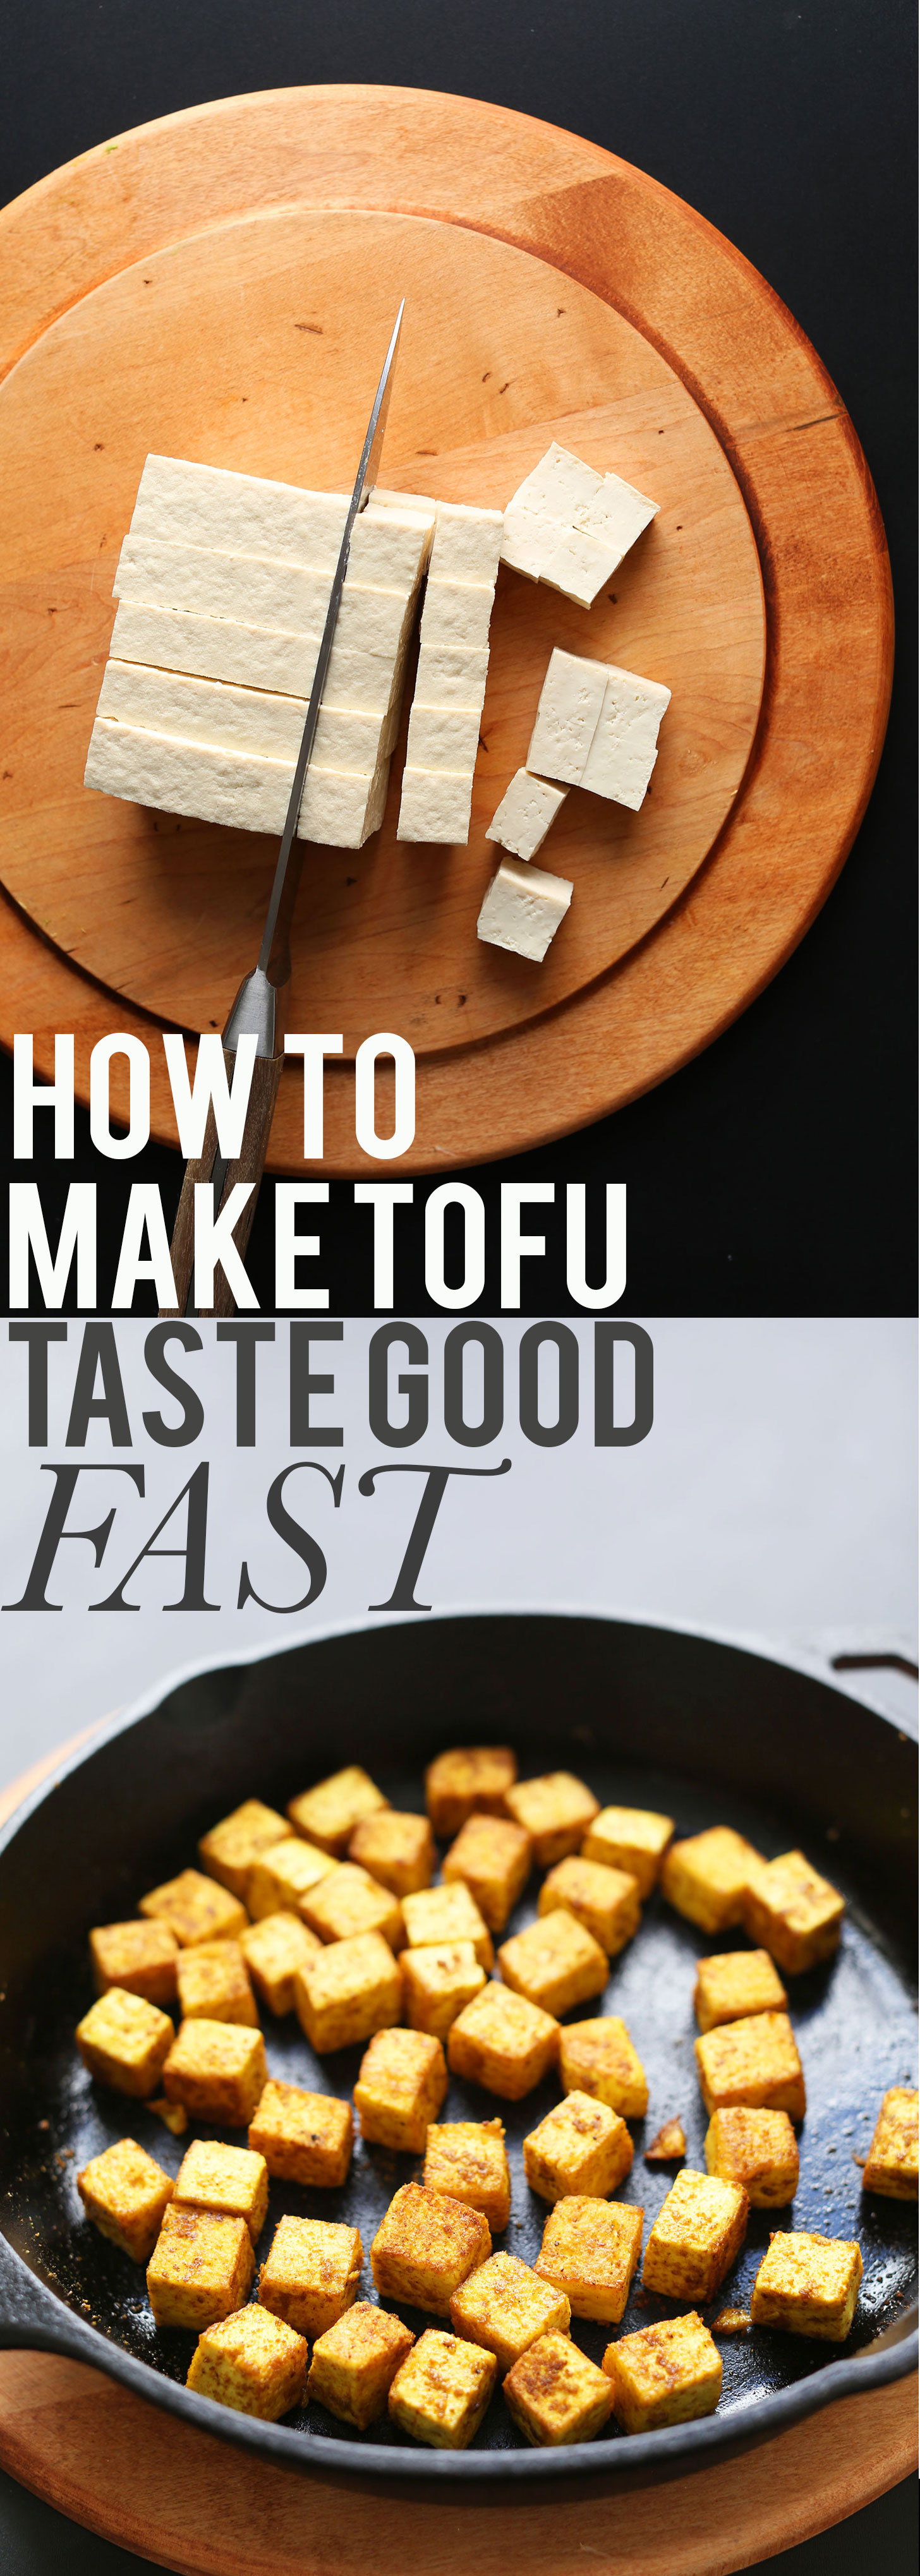 How-to-make-tofu-taste-good-fast-in-20-minutes-a-special-method-crisps-it-up-without-frying-vegan-glutenfree-tofu-recipe